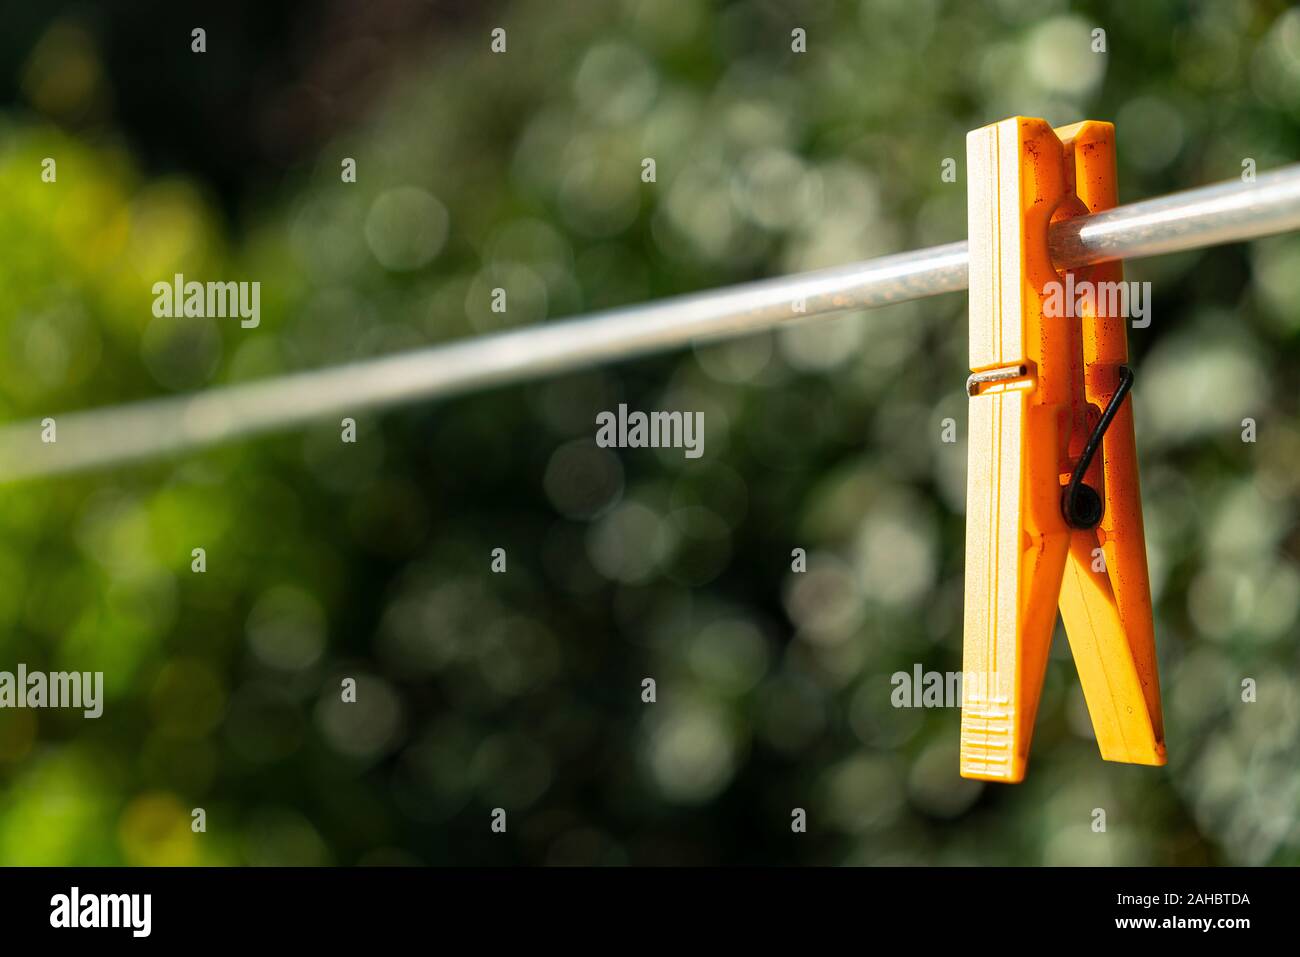 a clothespin hanging on a wire in the garden Stock Photo